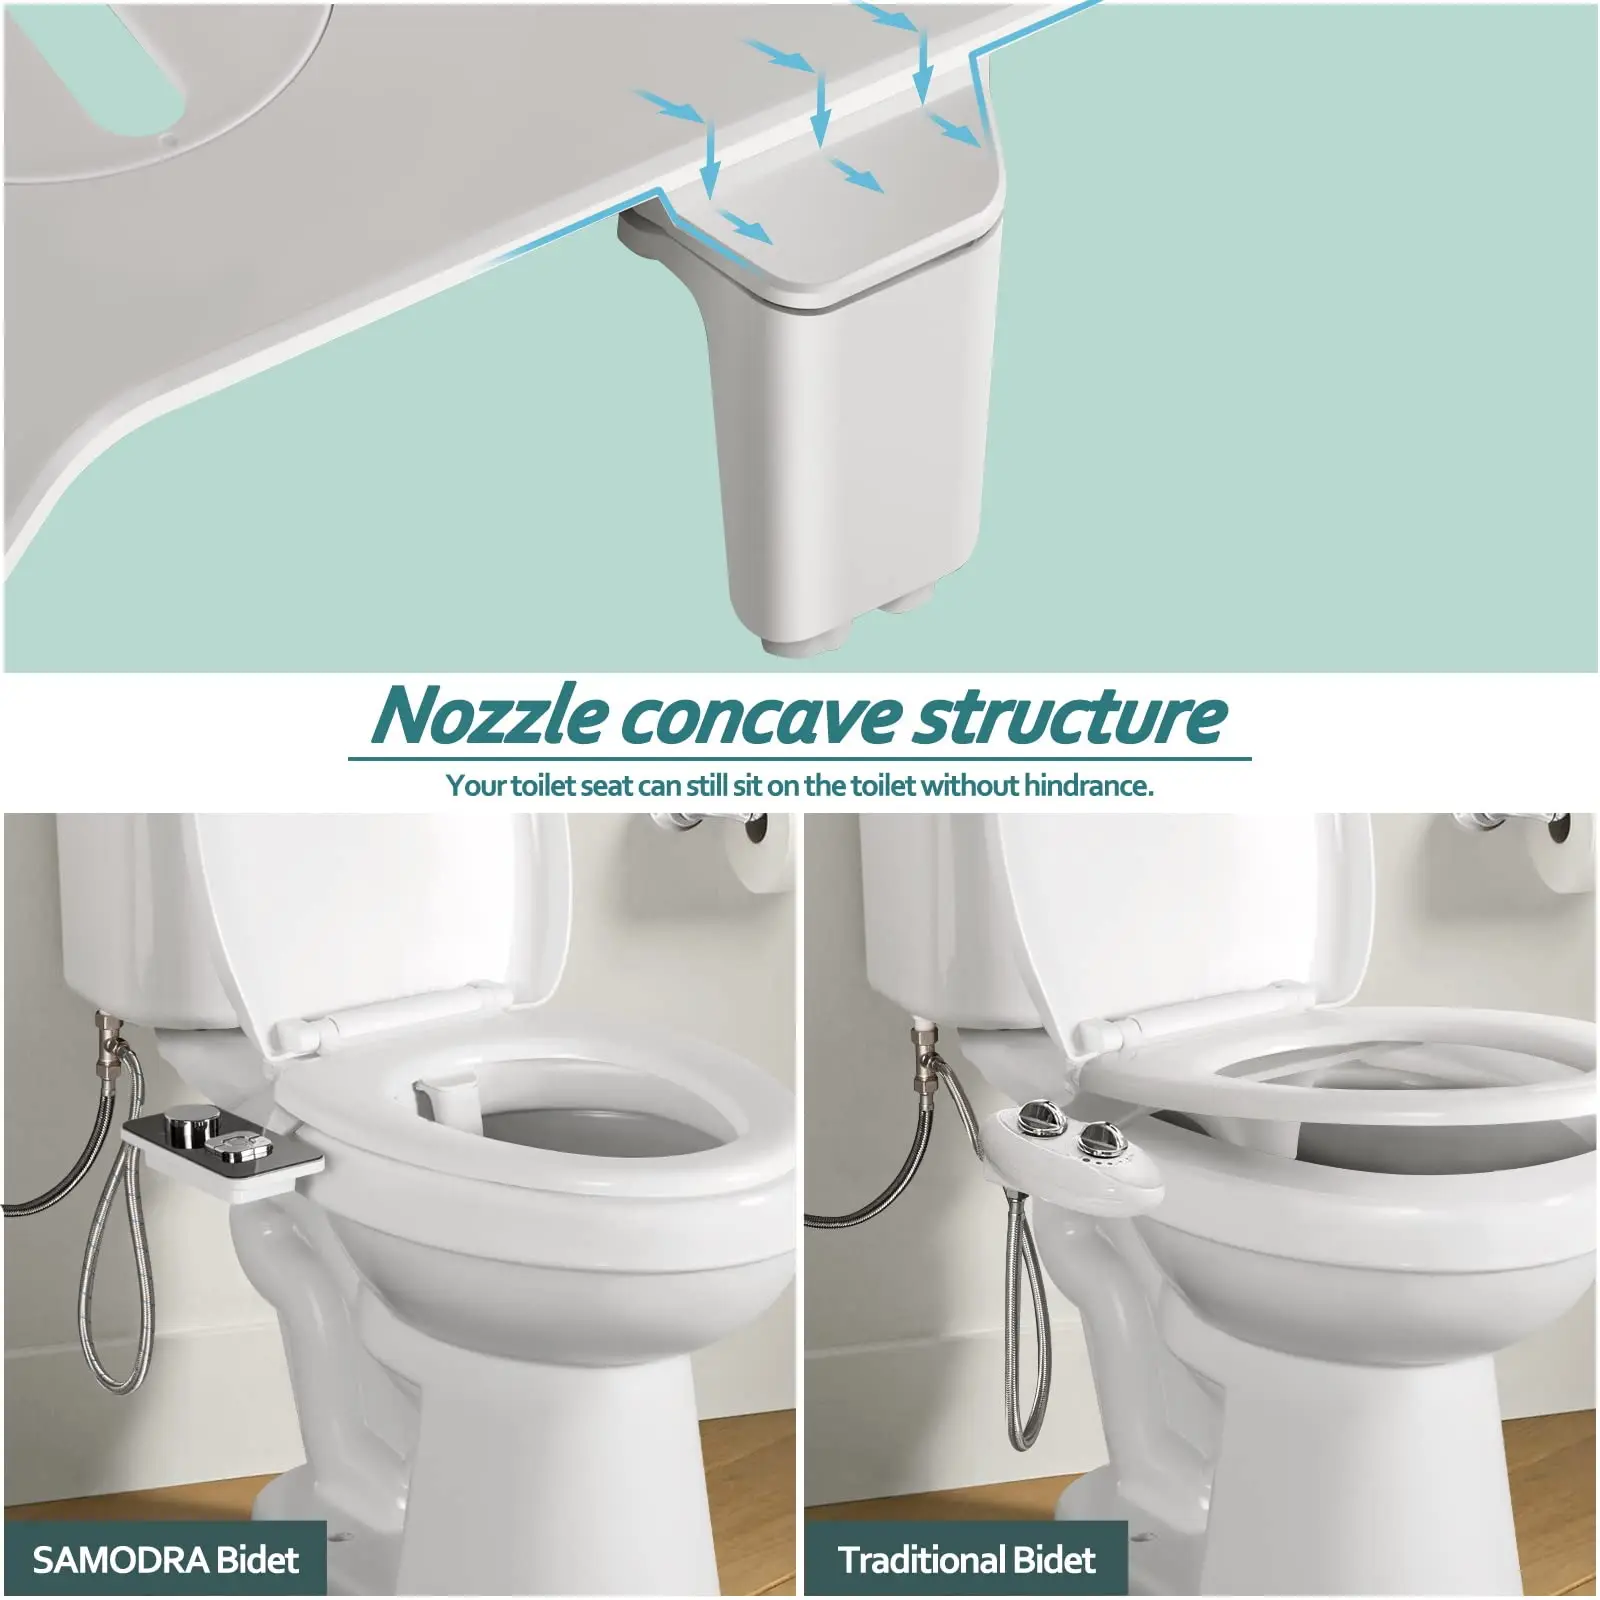 Bathroom Toilet Hygienic Bidet Seat Attachment Self Cleaning Nozzle Adjustable Water Flow For Personal Hygiene White SOULONG Single Nozzle Bidet 